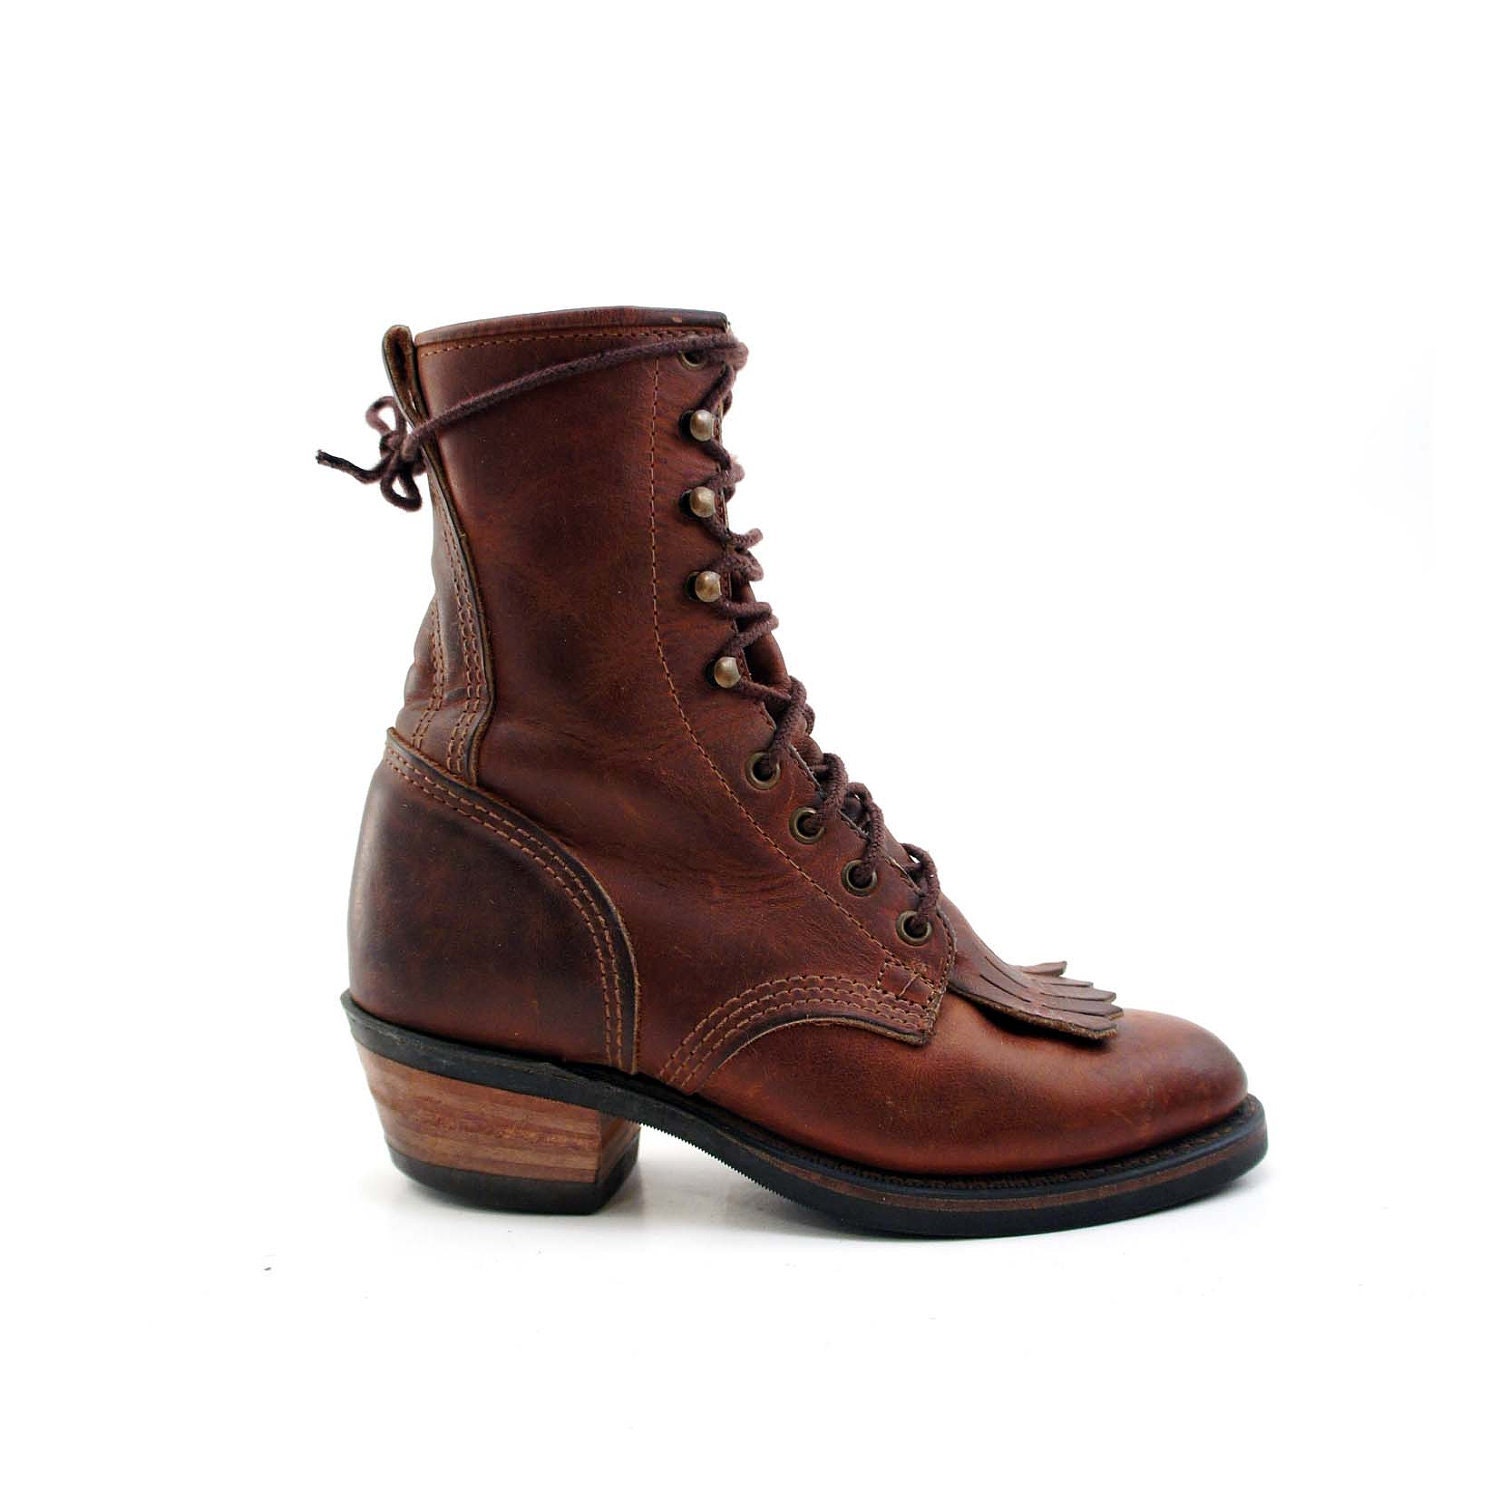 Durango Lacer Boot with Packer Heel and Kiltie Toes / Country